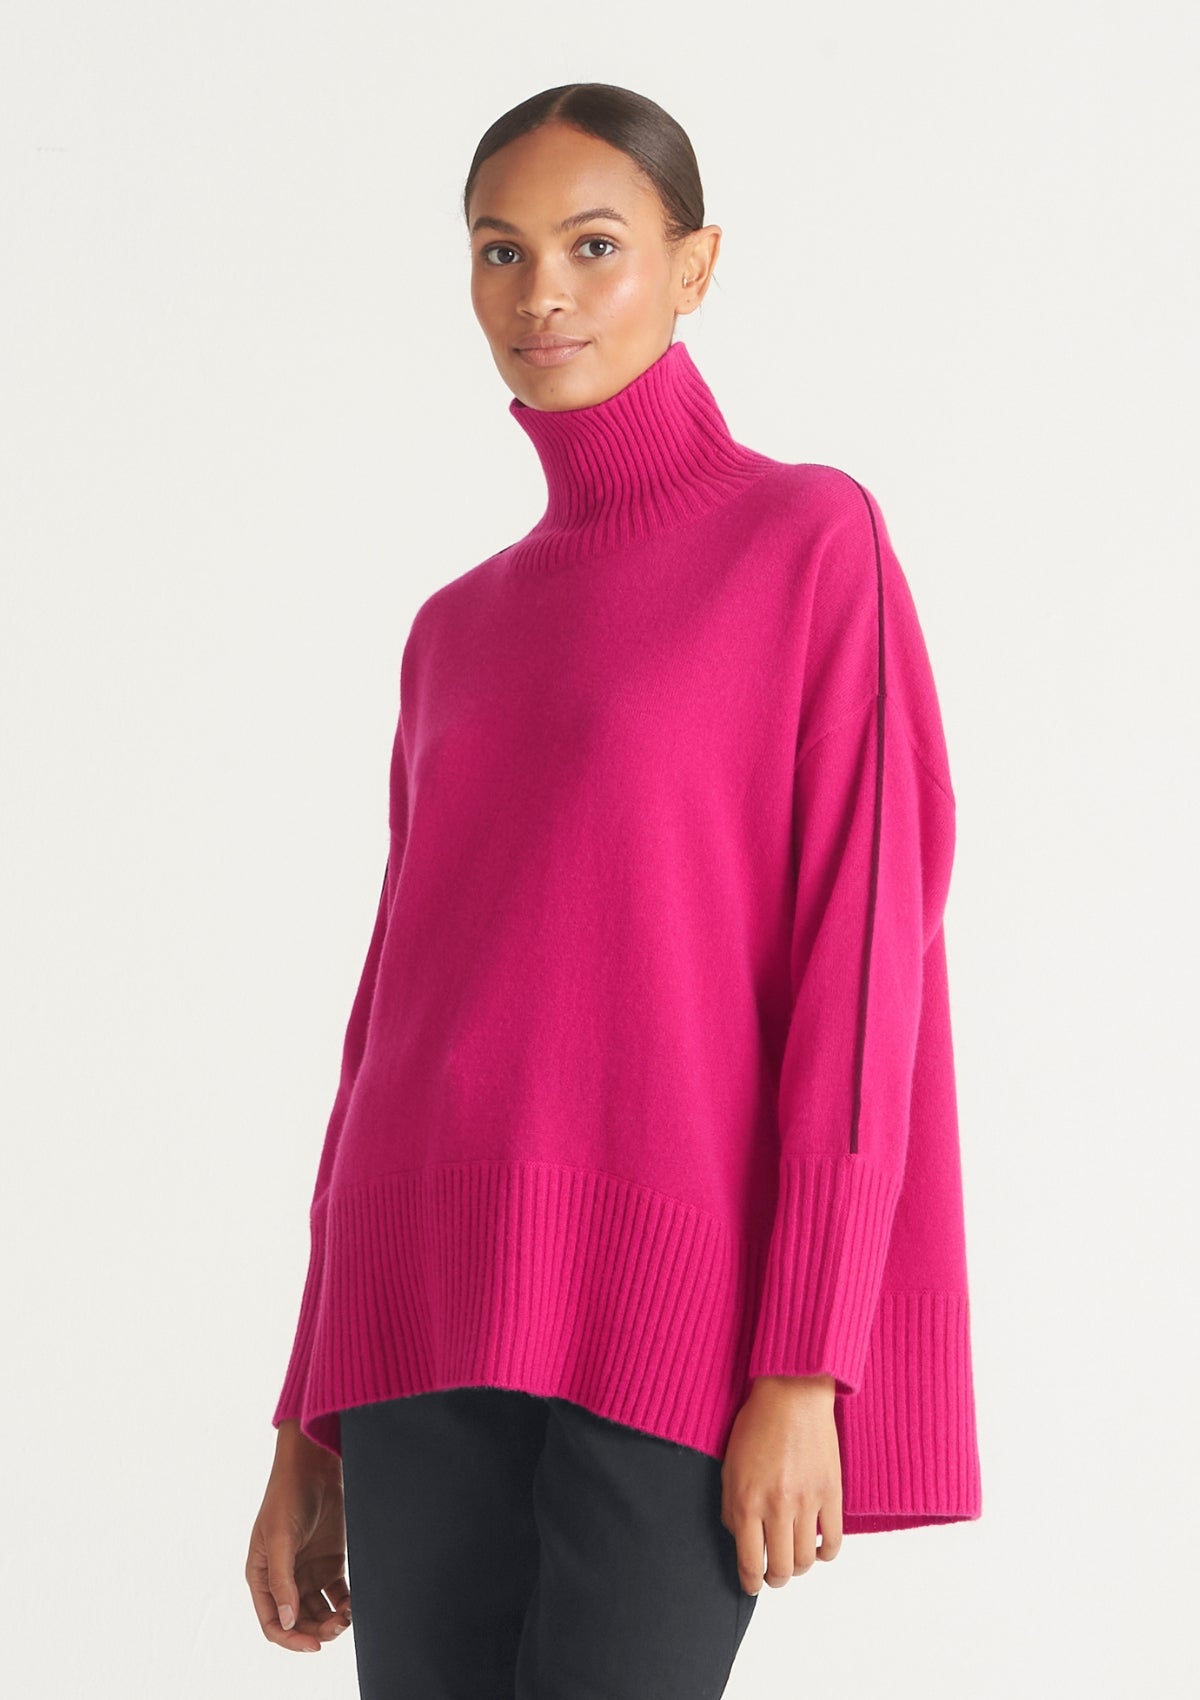 Contrast Trim Polo Neck Sweater in Cherry Pink/Barolo Red